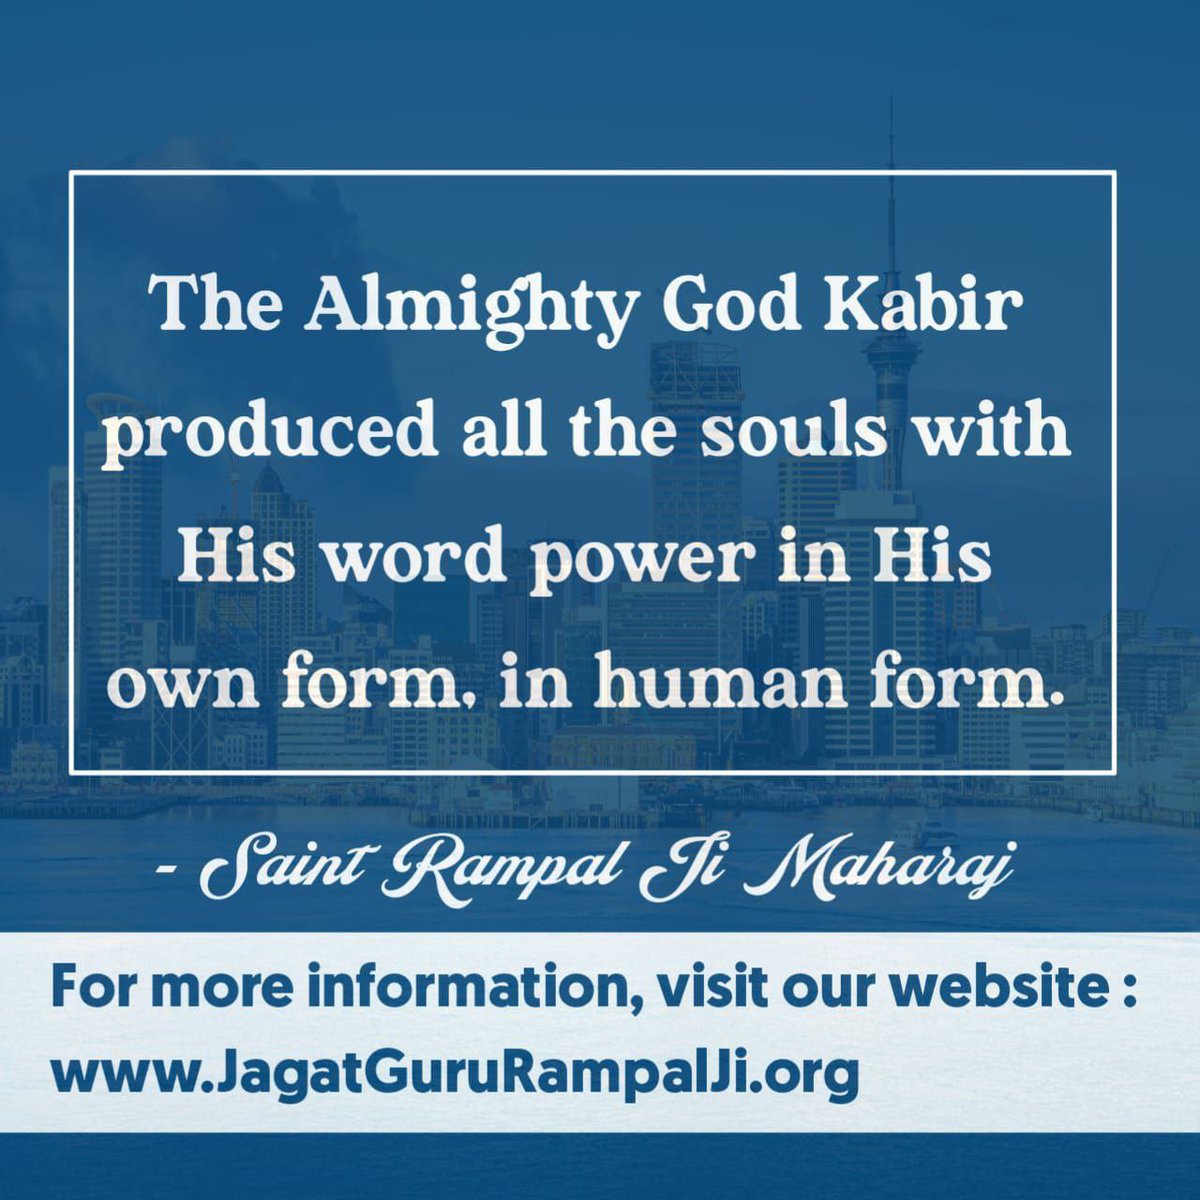 #GodMorningTuesday The Almighty God Kabir produced all the souls with His word power in His own form, in human form. #Tuesday